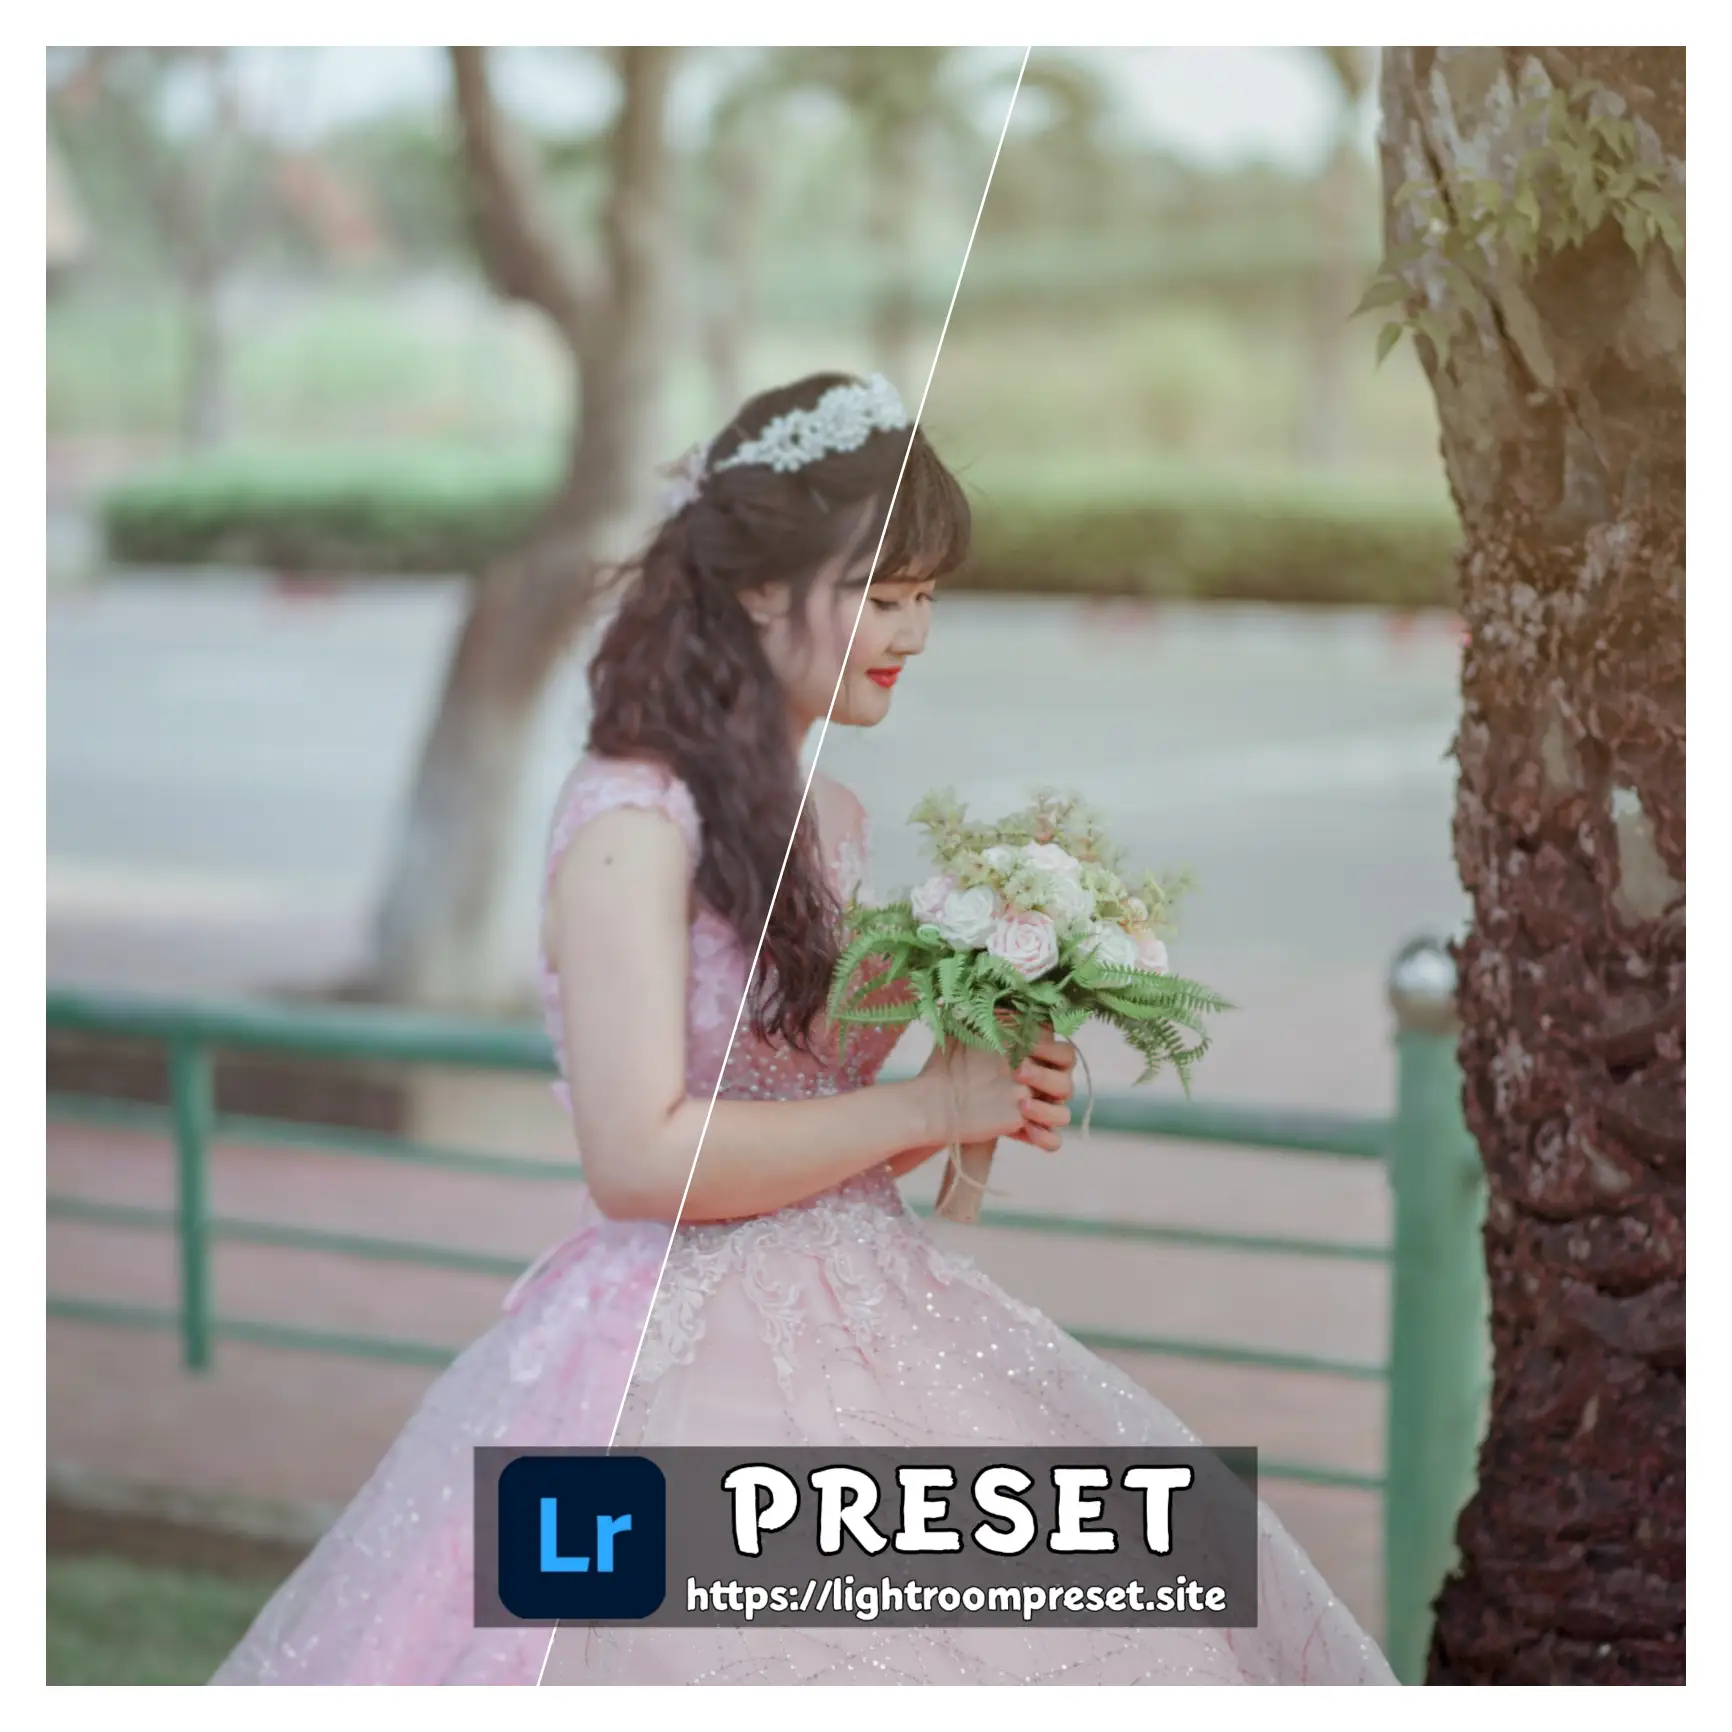 You are currently viewing Lightroom presets for wedding photography download free